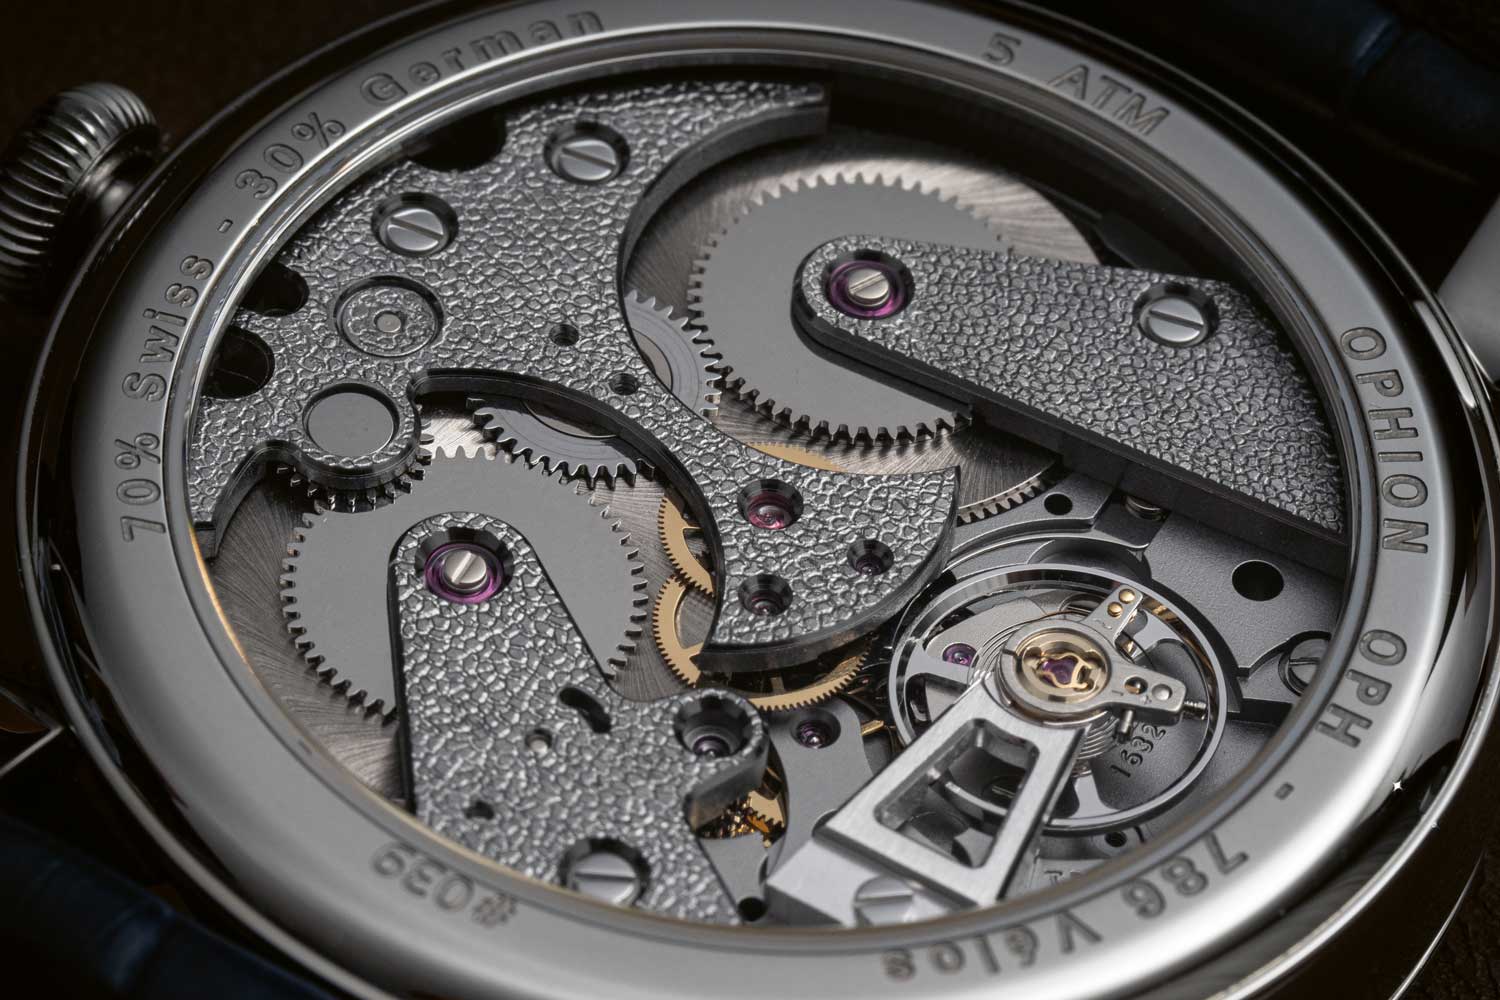 The base movement used by Ophion OPH 786 Velos is the same as the two previous watches of the brand, a proprietary movement made by Soprod with a five-day power reserve.